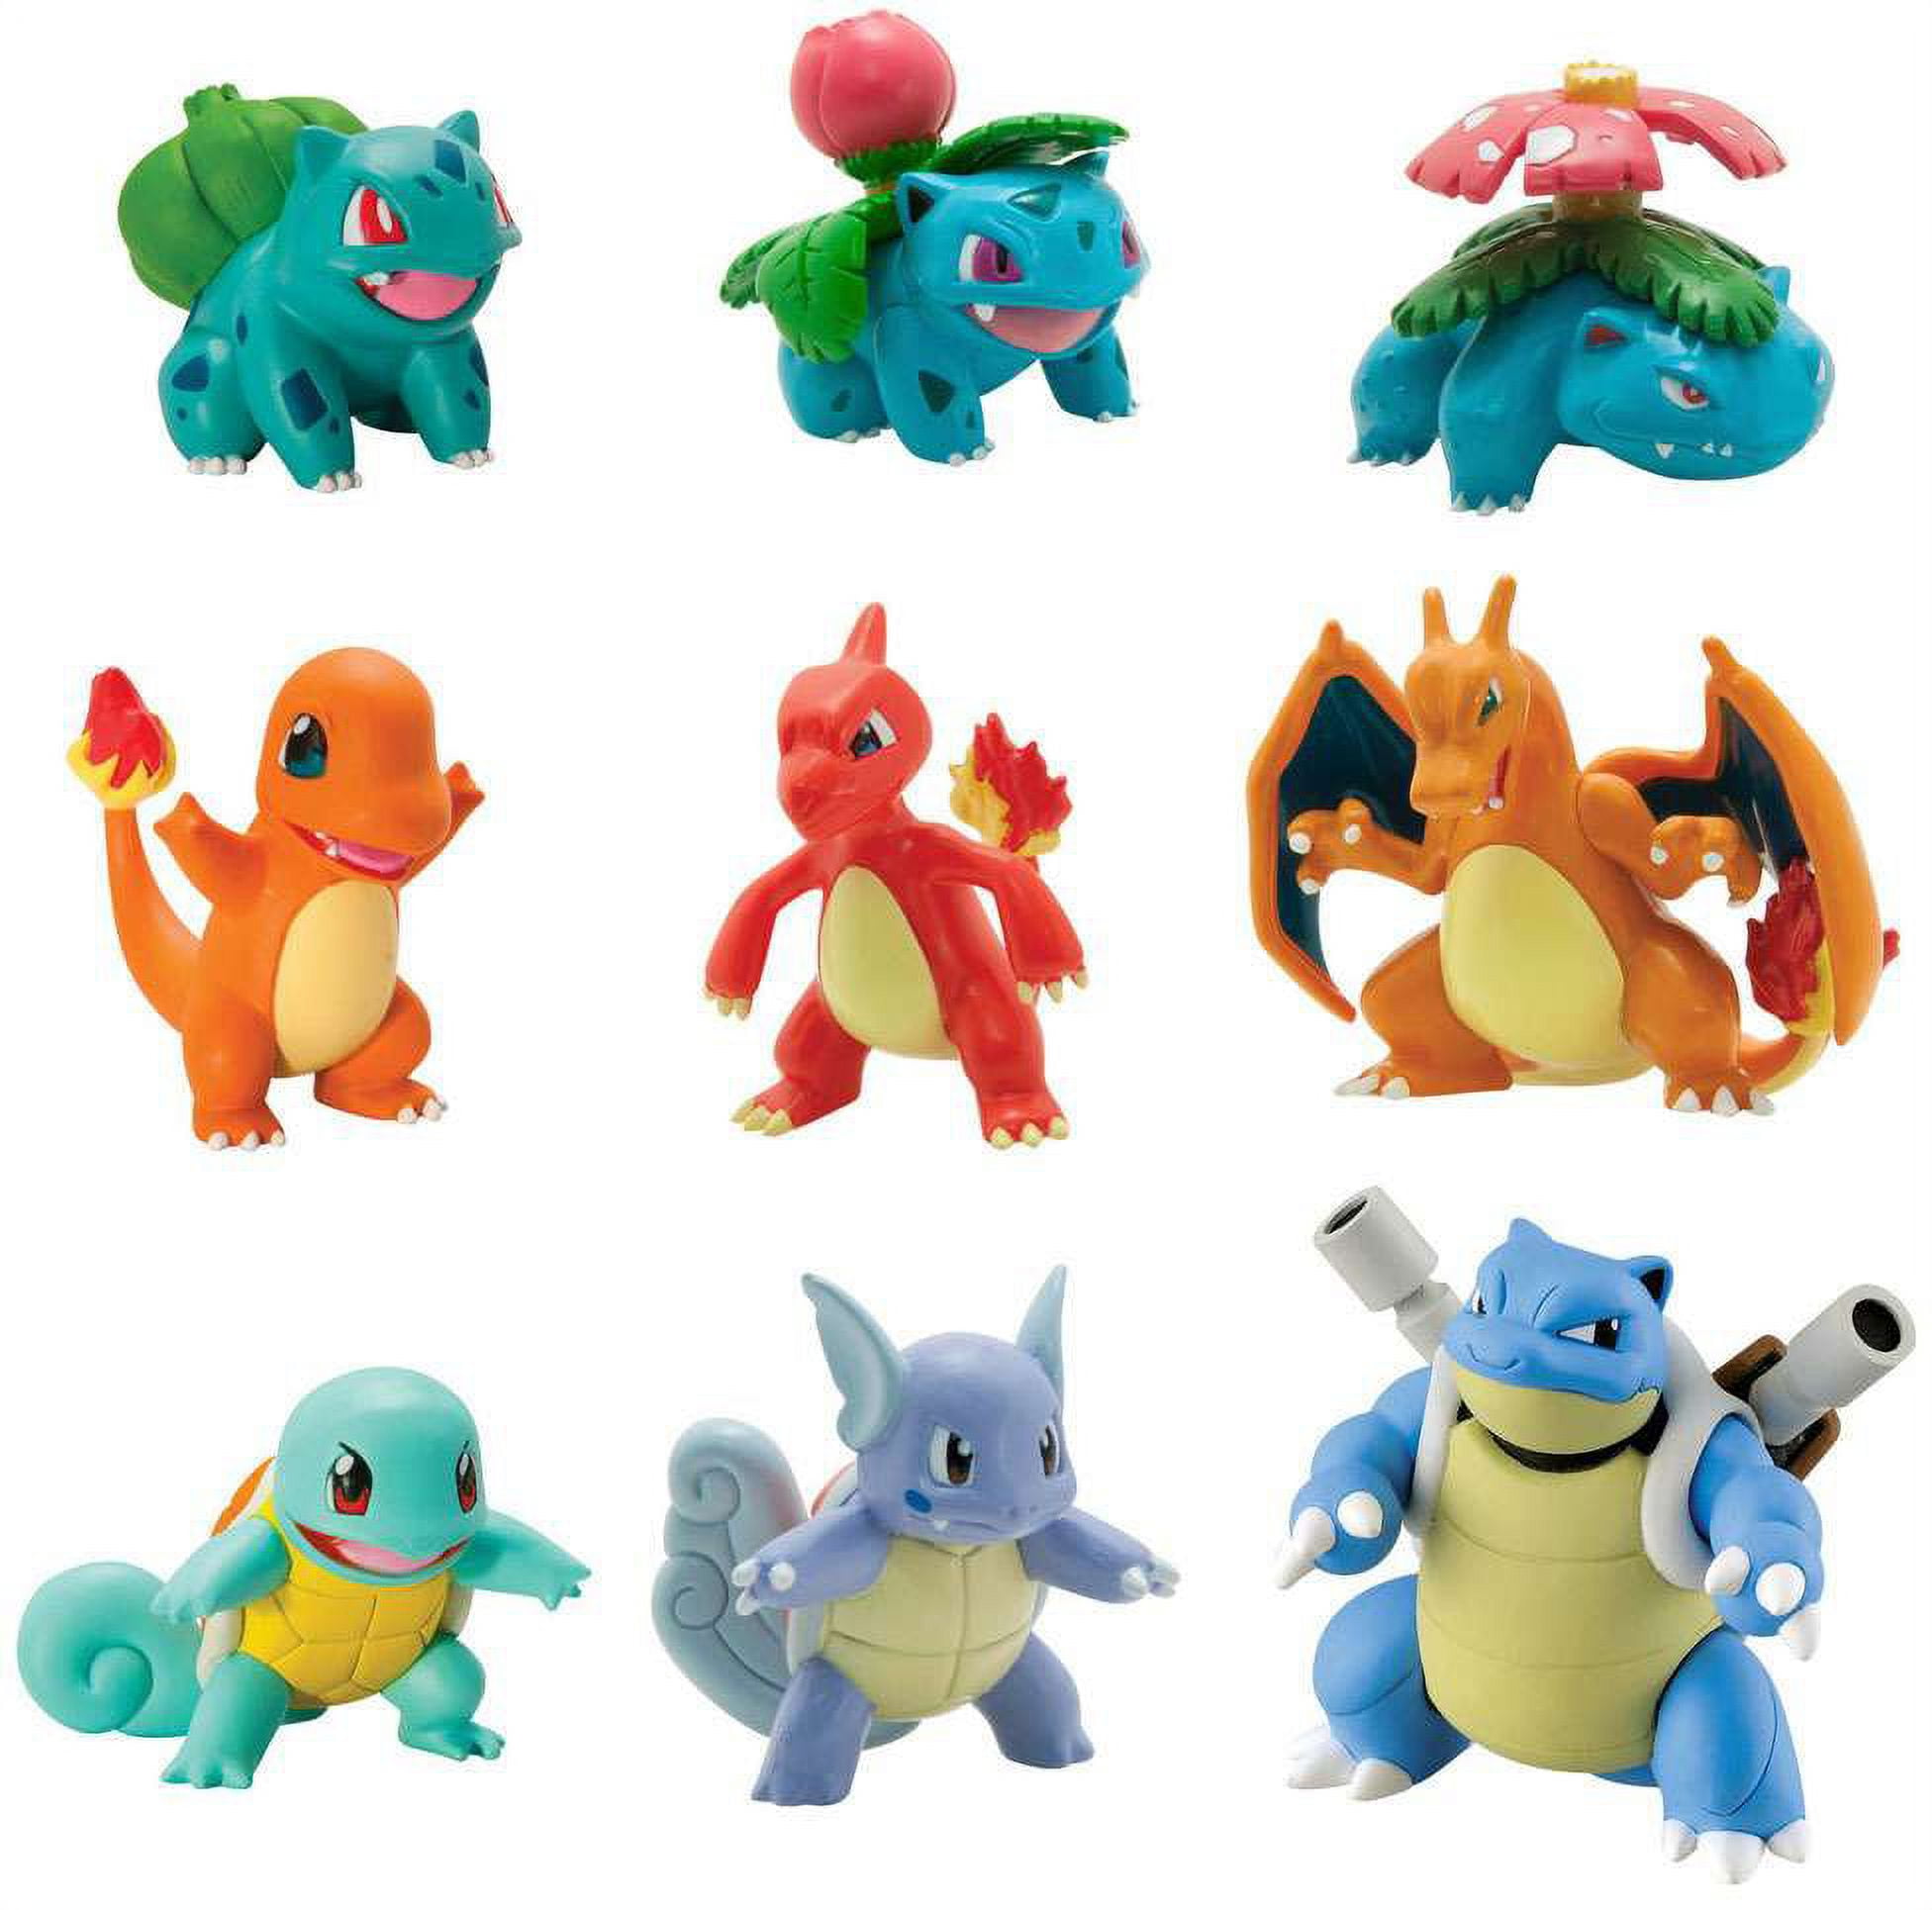 Squirtle, Charmander and Bulbasaur evolutions